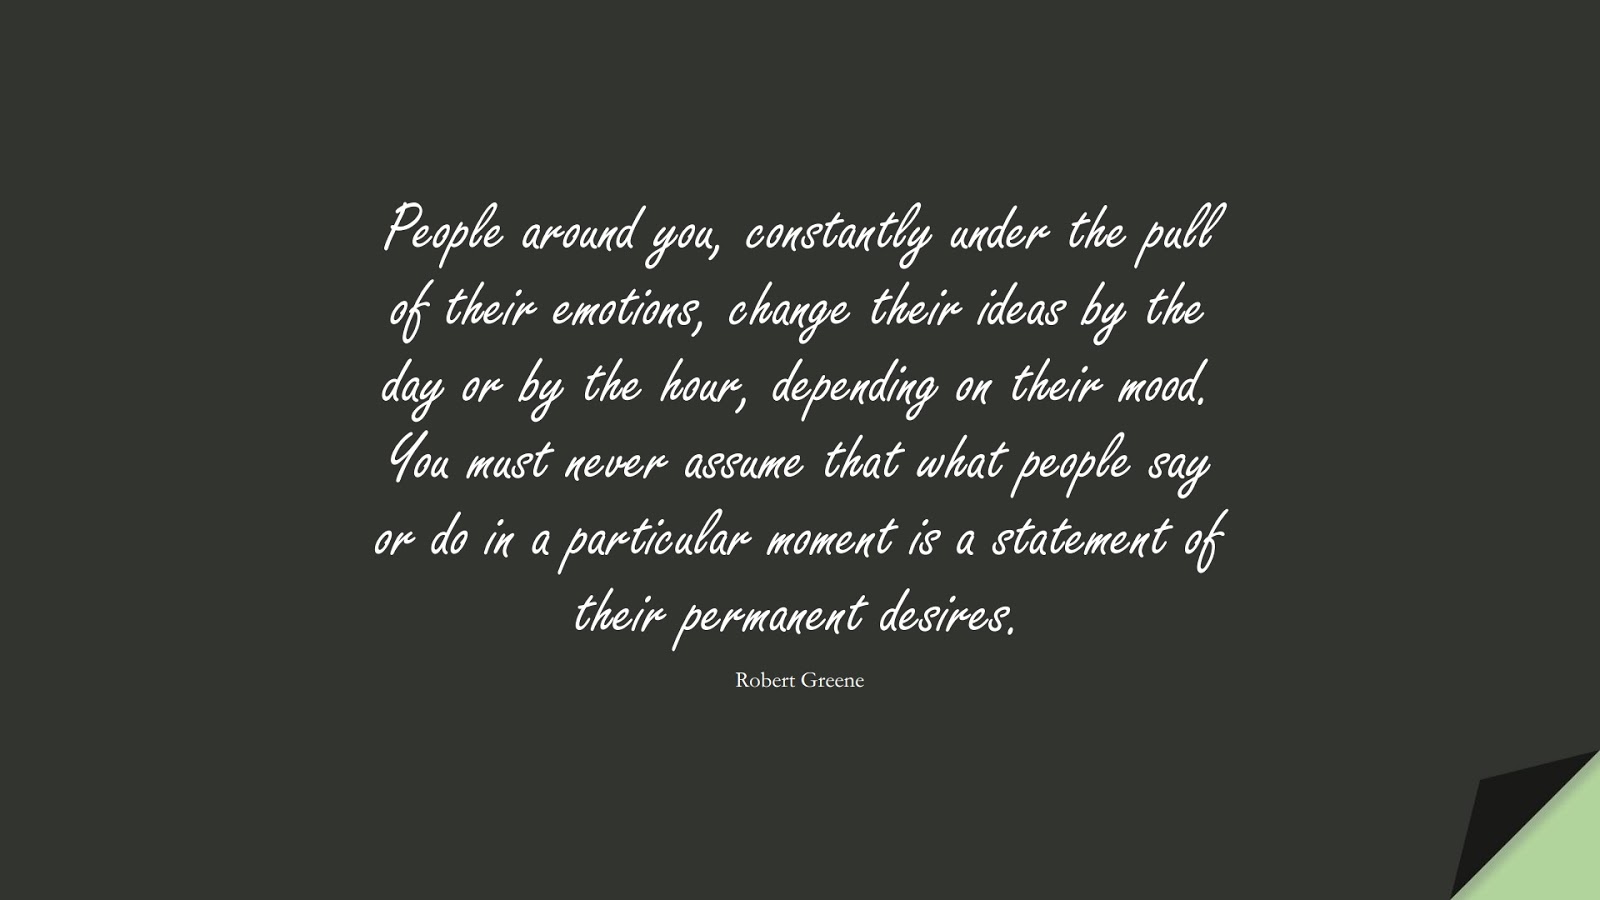 People around you, constantly under the pull of their emotions, change their ideas by the day or by the hour, depending on their mood. You must never assume that what people say or do in a particular moment is a statement of their permanent desires. (Robert Greene);  #ChangeQuotes